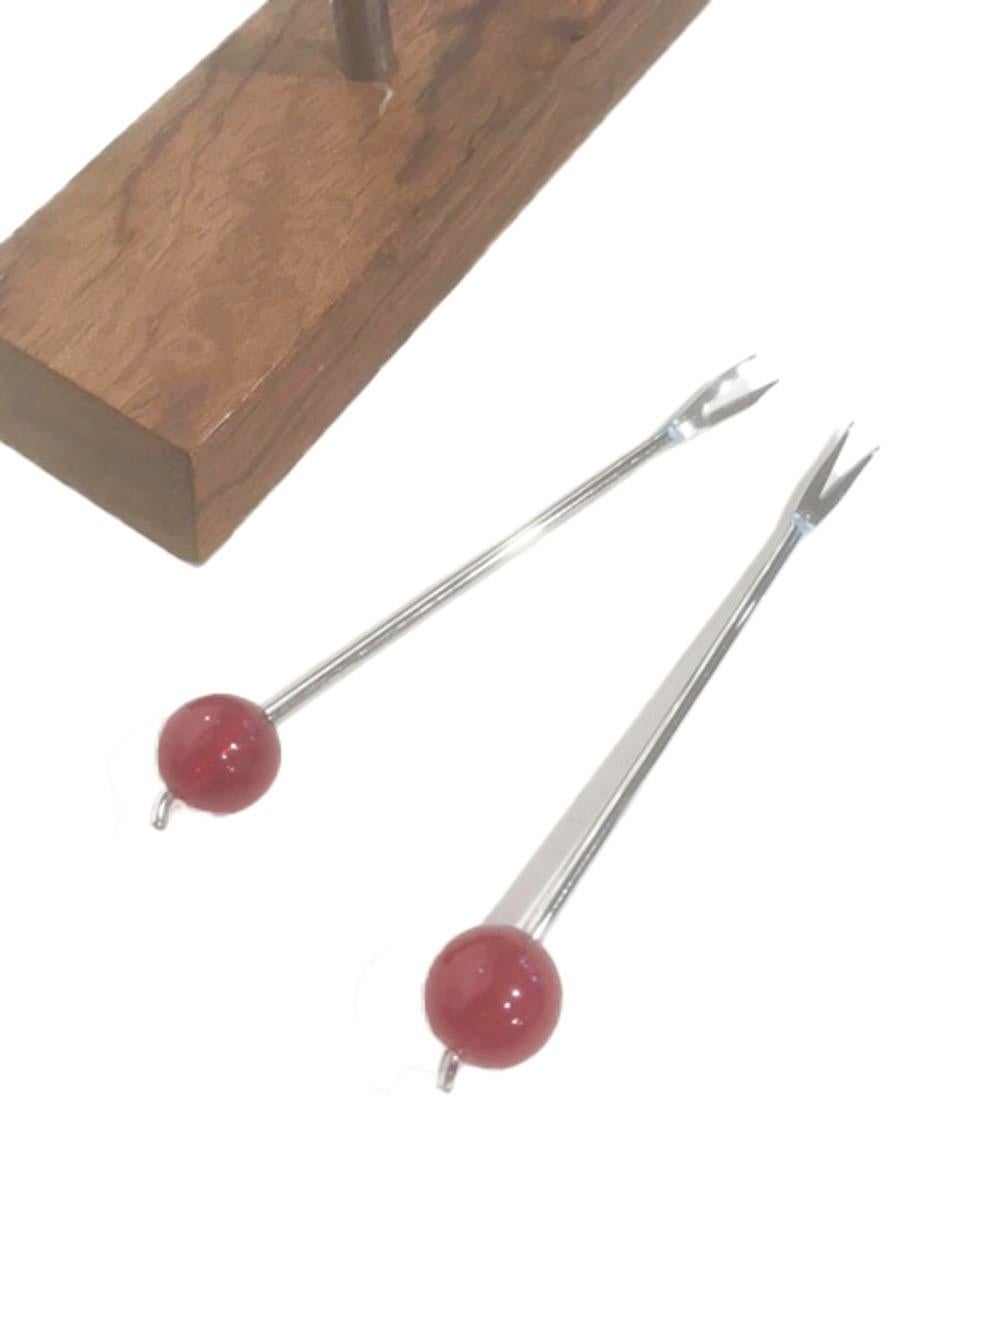 12 Art Deco Cocktail Picks in Chrome with Cherry Tops Hanging in Matching Stand In Good Condition For Sale In Nantucket, MA